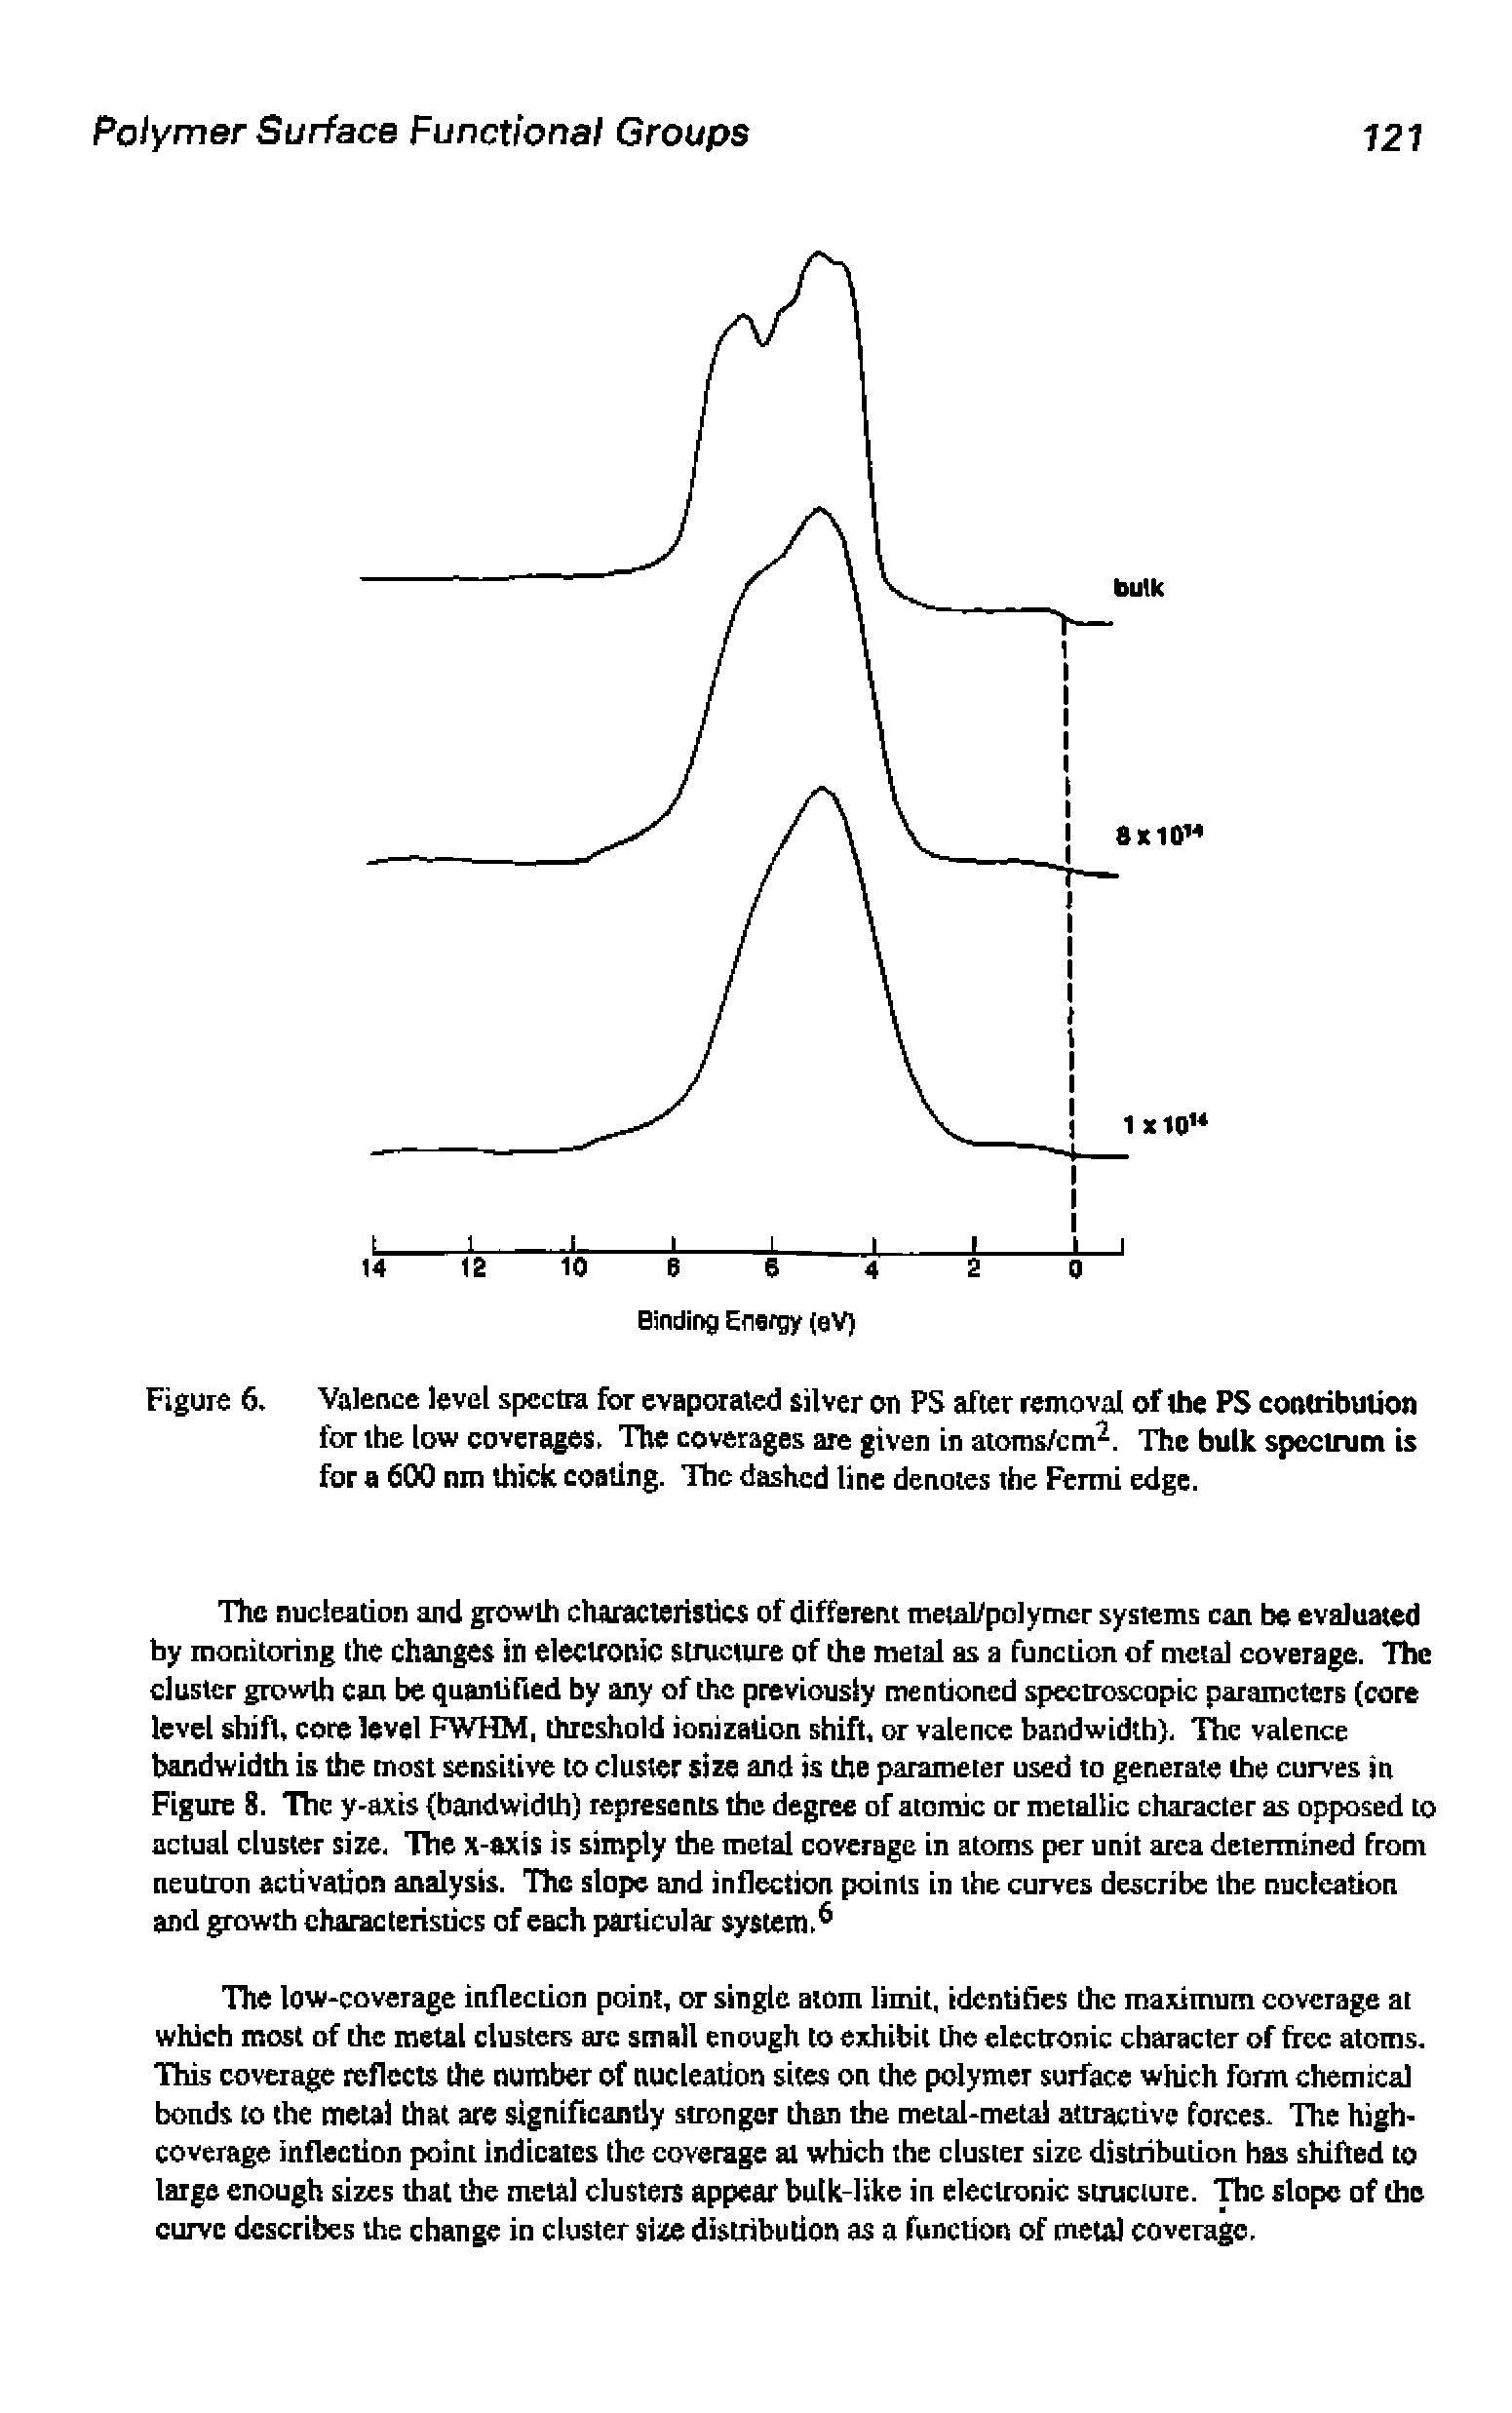 Figure 6, Valence level spectra for evaporated silver on PS after removal of the PS conttibution for the low coverages. The coverages are given in atoms/cm. The bulk spcctium is for a 600 nm thick coating. The dashed line denotes the Fermi edge.